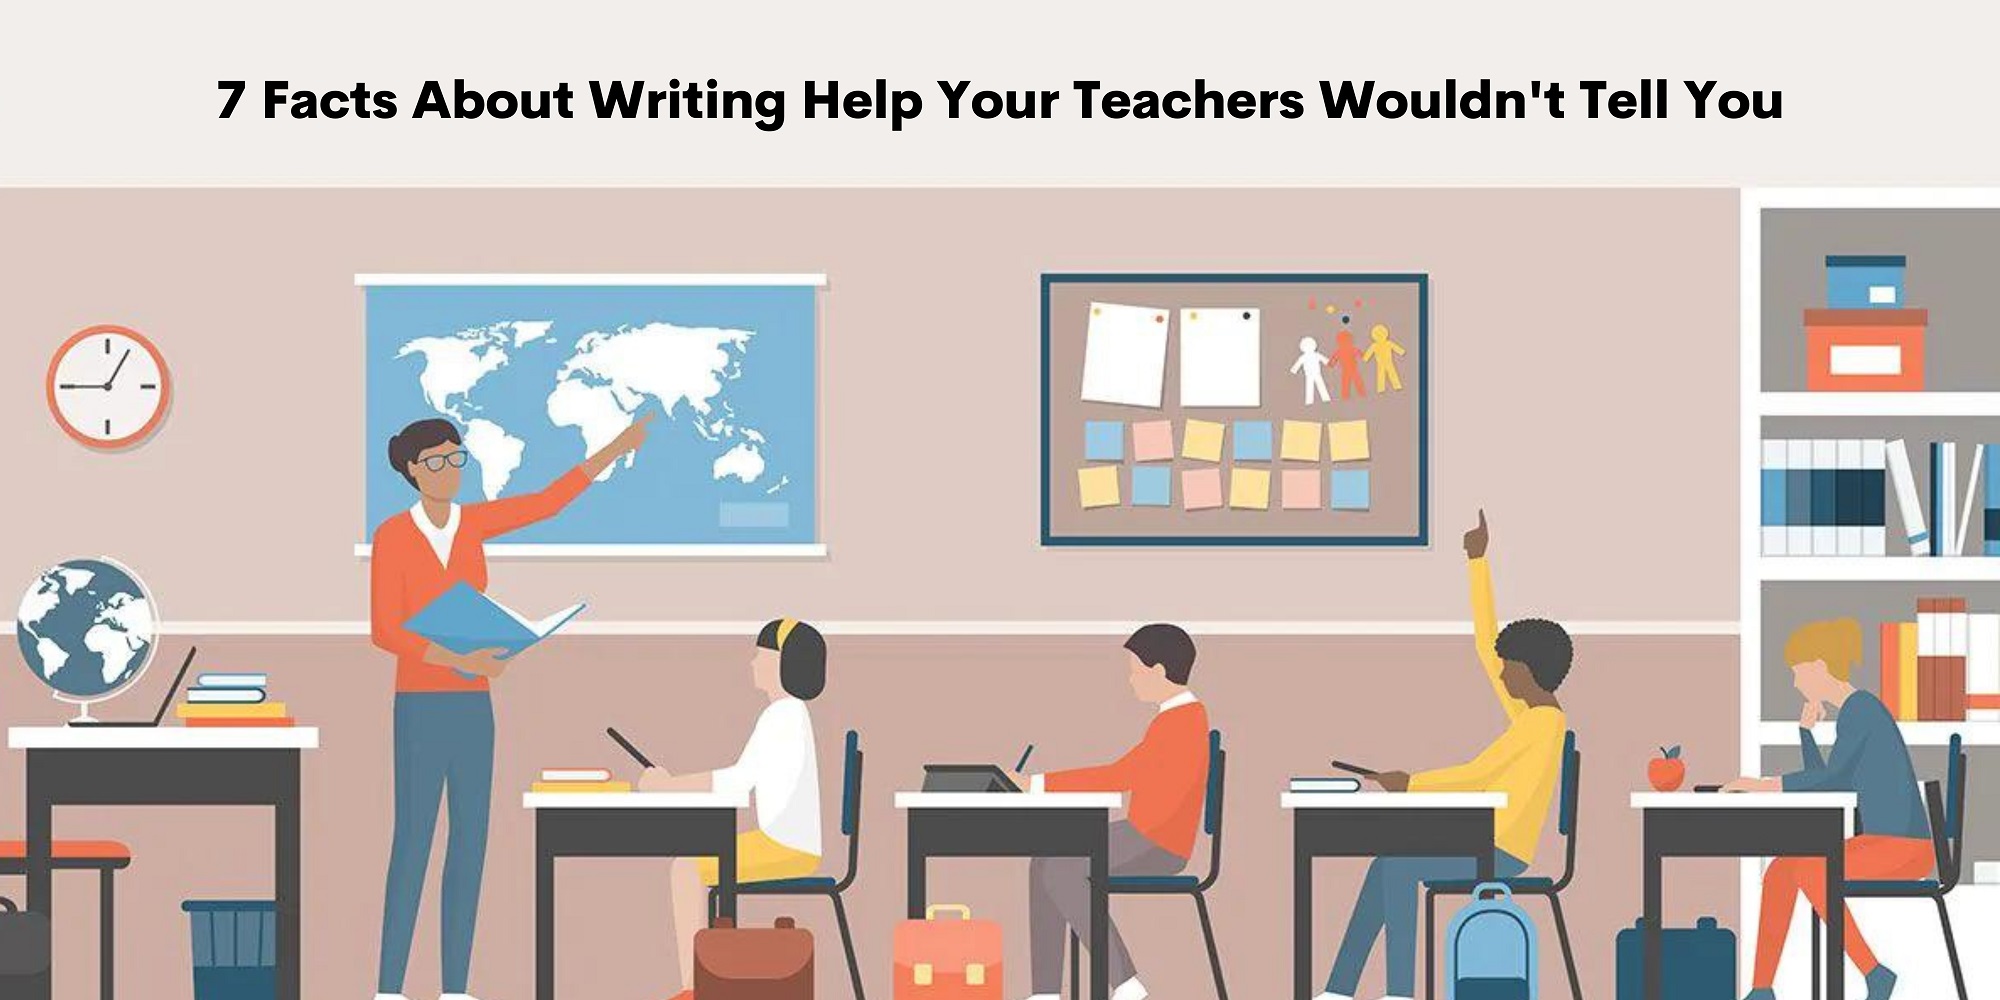 7 Facts About Writing Help Your Teachers Wouldn’t Tell You